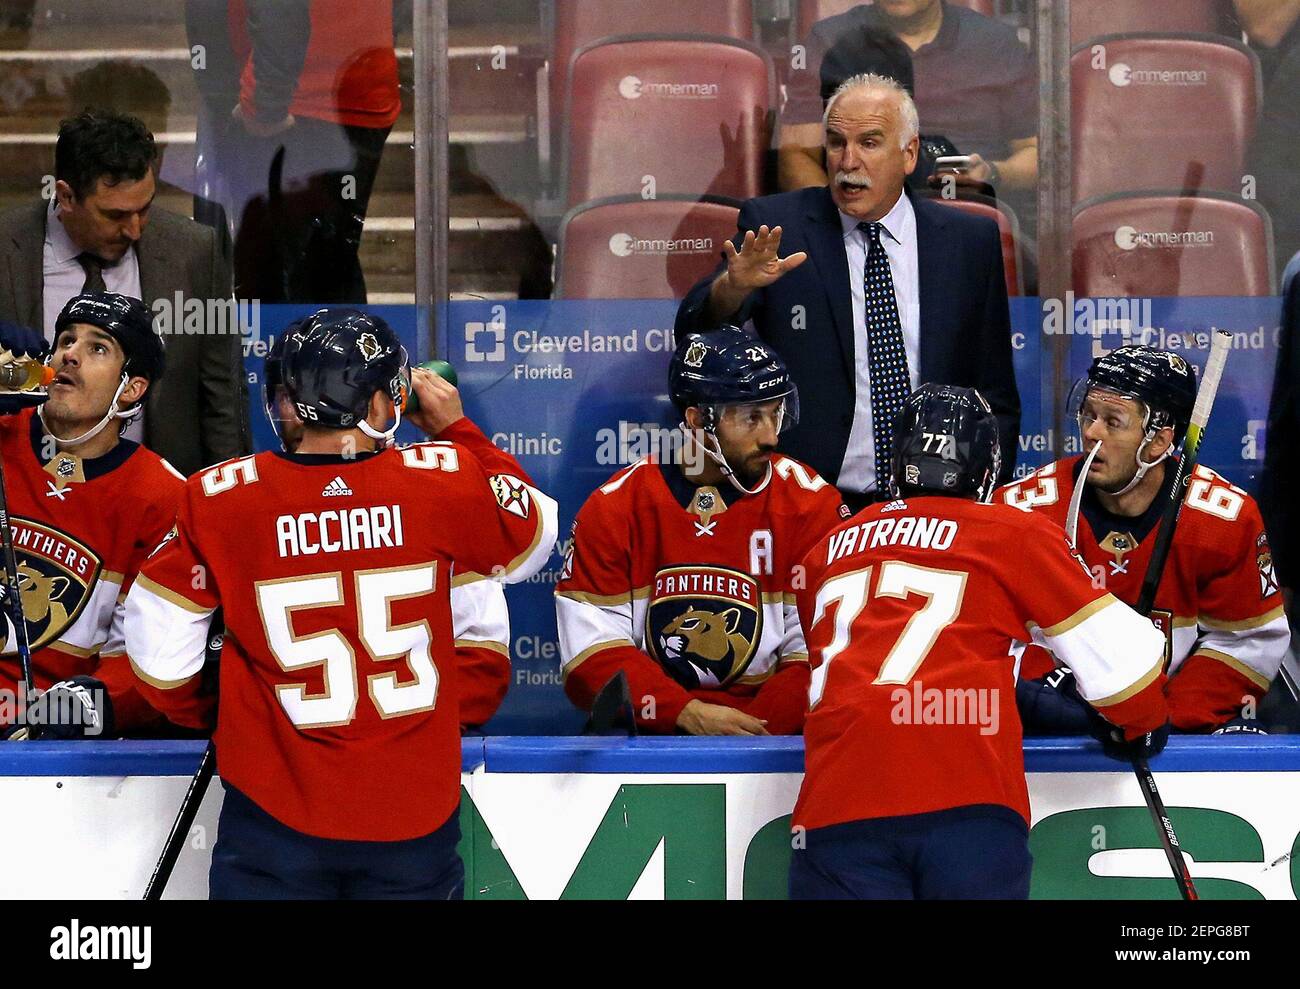 Florida Panthers head coach Joel Quenneville gives instructions to his team against the New York Islanders at the BB&T Center in Sunrise, Fla., on December 12, 2019. (Photo by David Santiago/Miami Herald/TNS/Sipa USA) Stock Photo